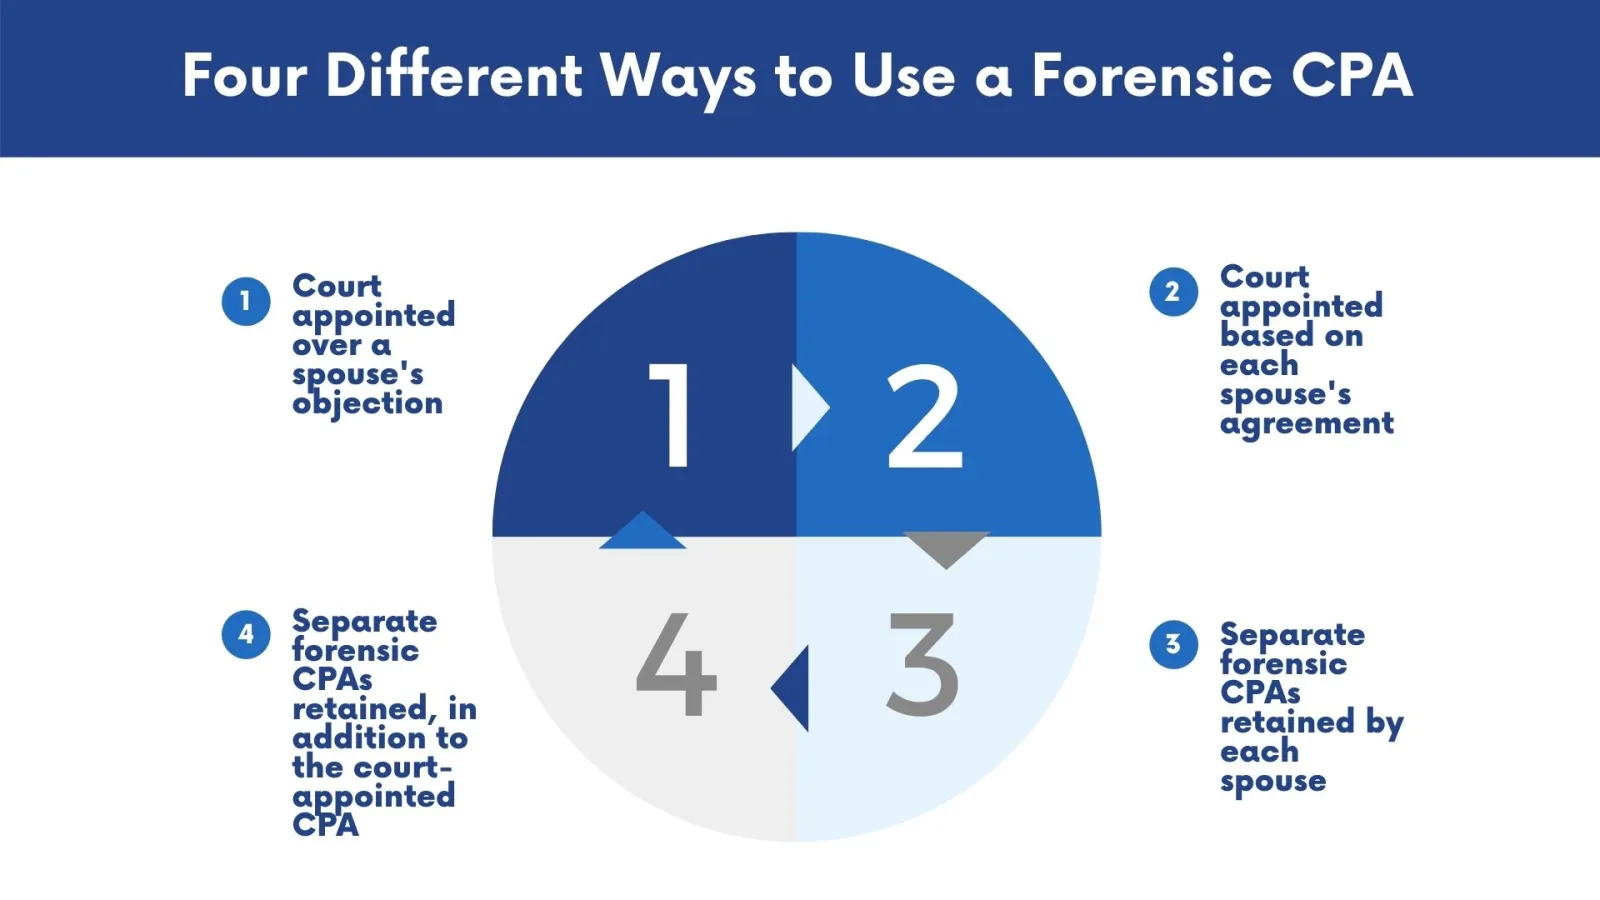 Graphic shows four different ways to use a forensic CPA